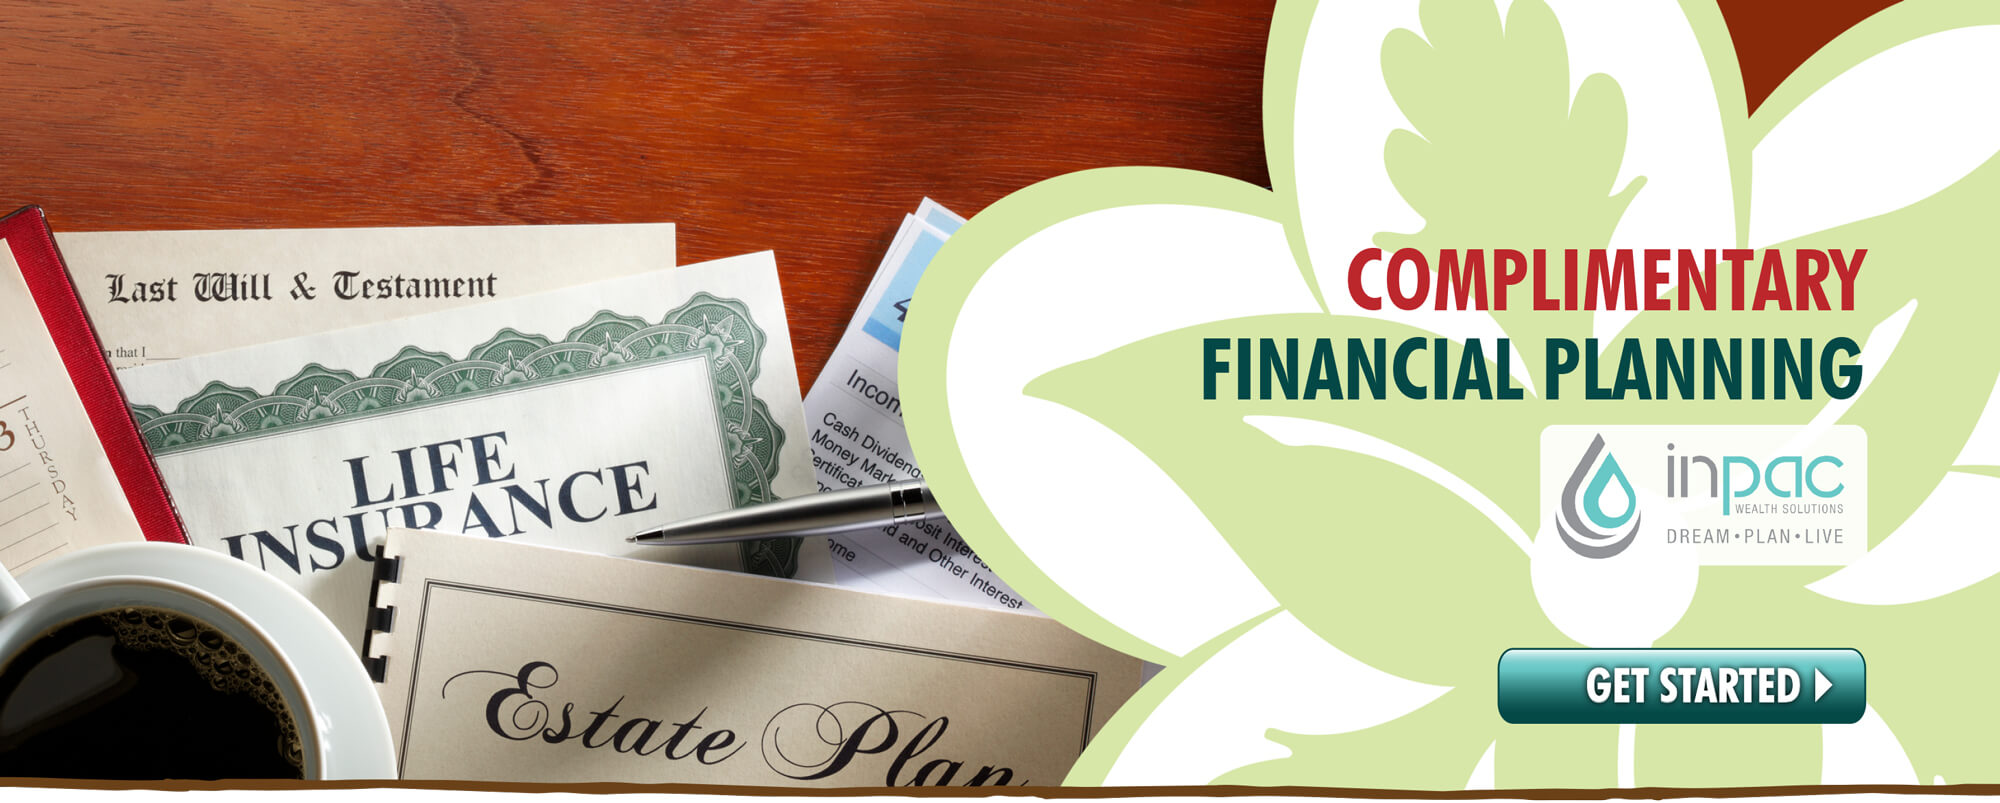 Schedule a FREE consultation with one of INPAC's Financial Advisors, courtesy of Hawaiian Financial Federal Credit Union.